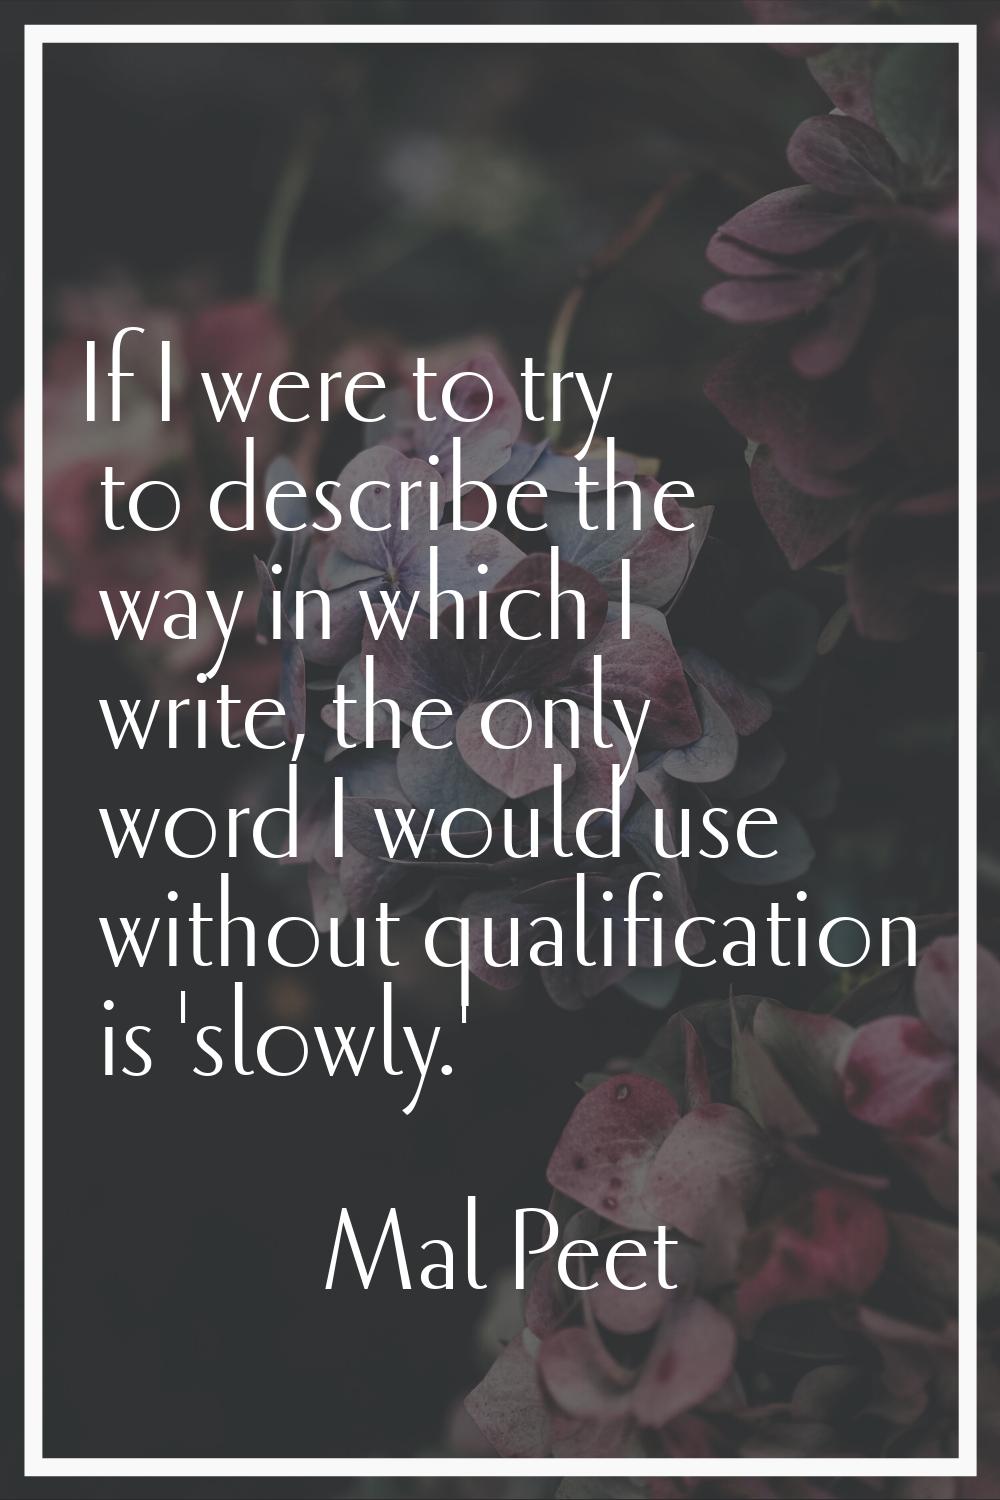 If I were to try to describe the way in which I write, the only word I would use without qualificat